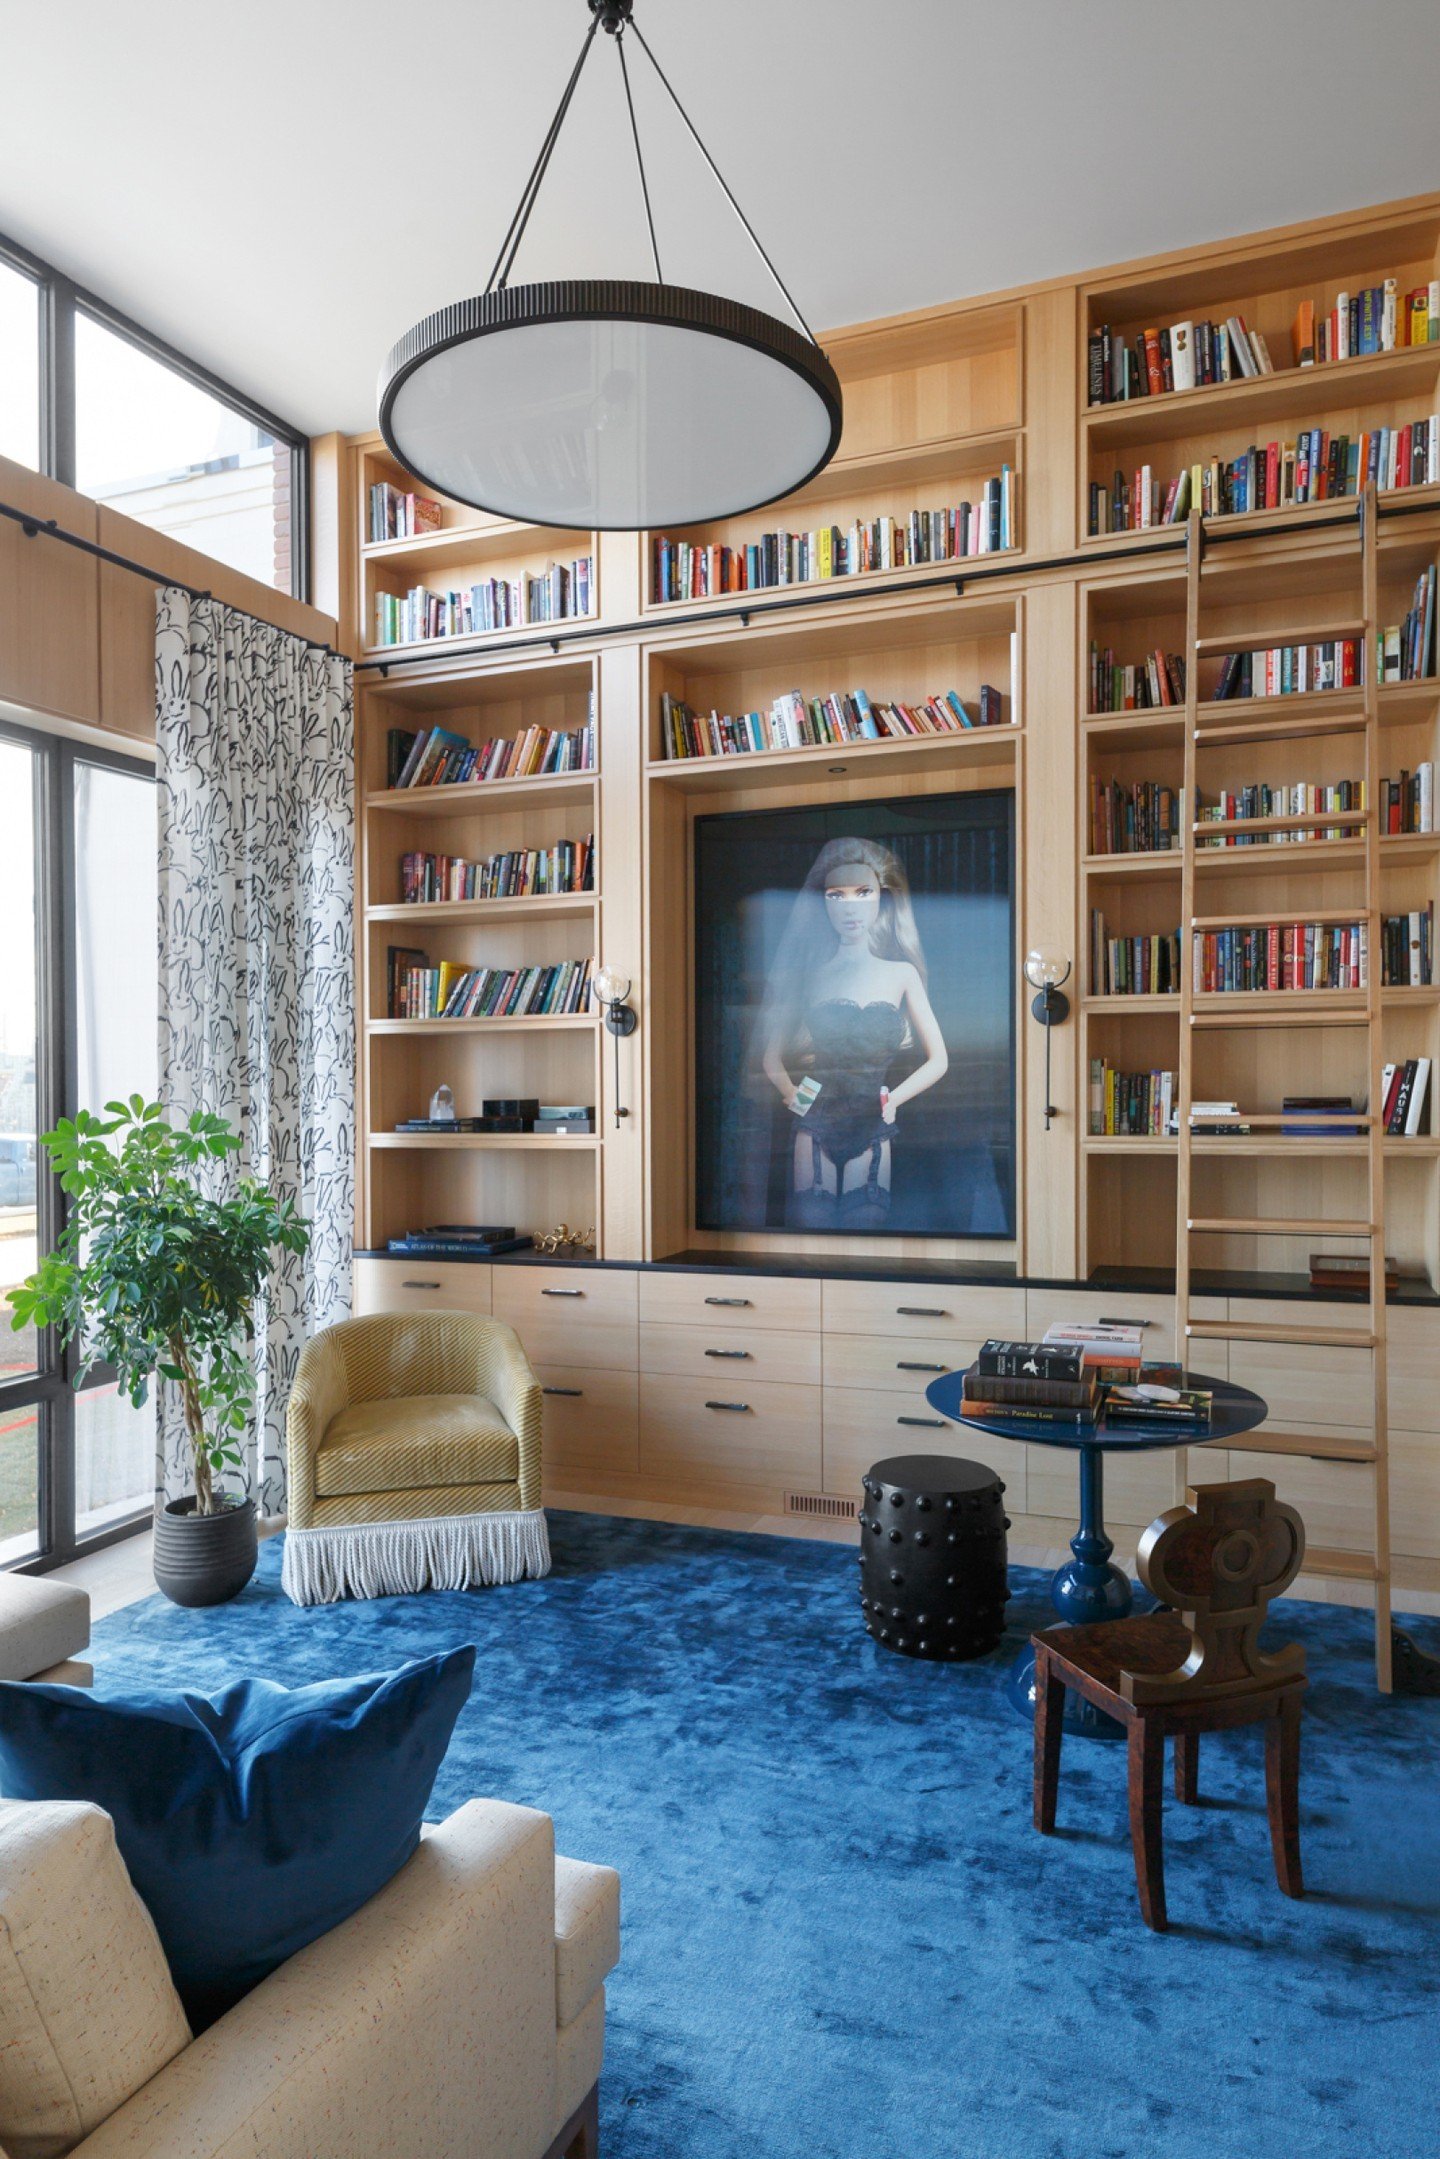 Welcome to the library from our #IHRosedaleResidence project! Custom floor-to-ceiling millwork, a curated collection of eclectic furniture, and whimsical fabric finishes come together to create a space that is both sophisticated and delightfully uniq